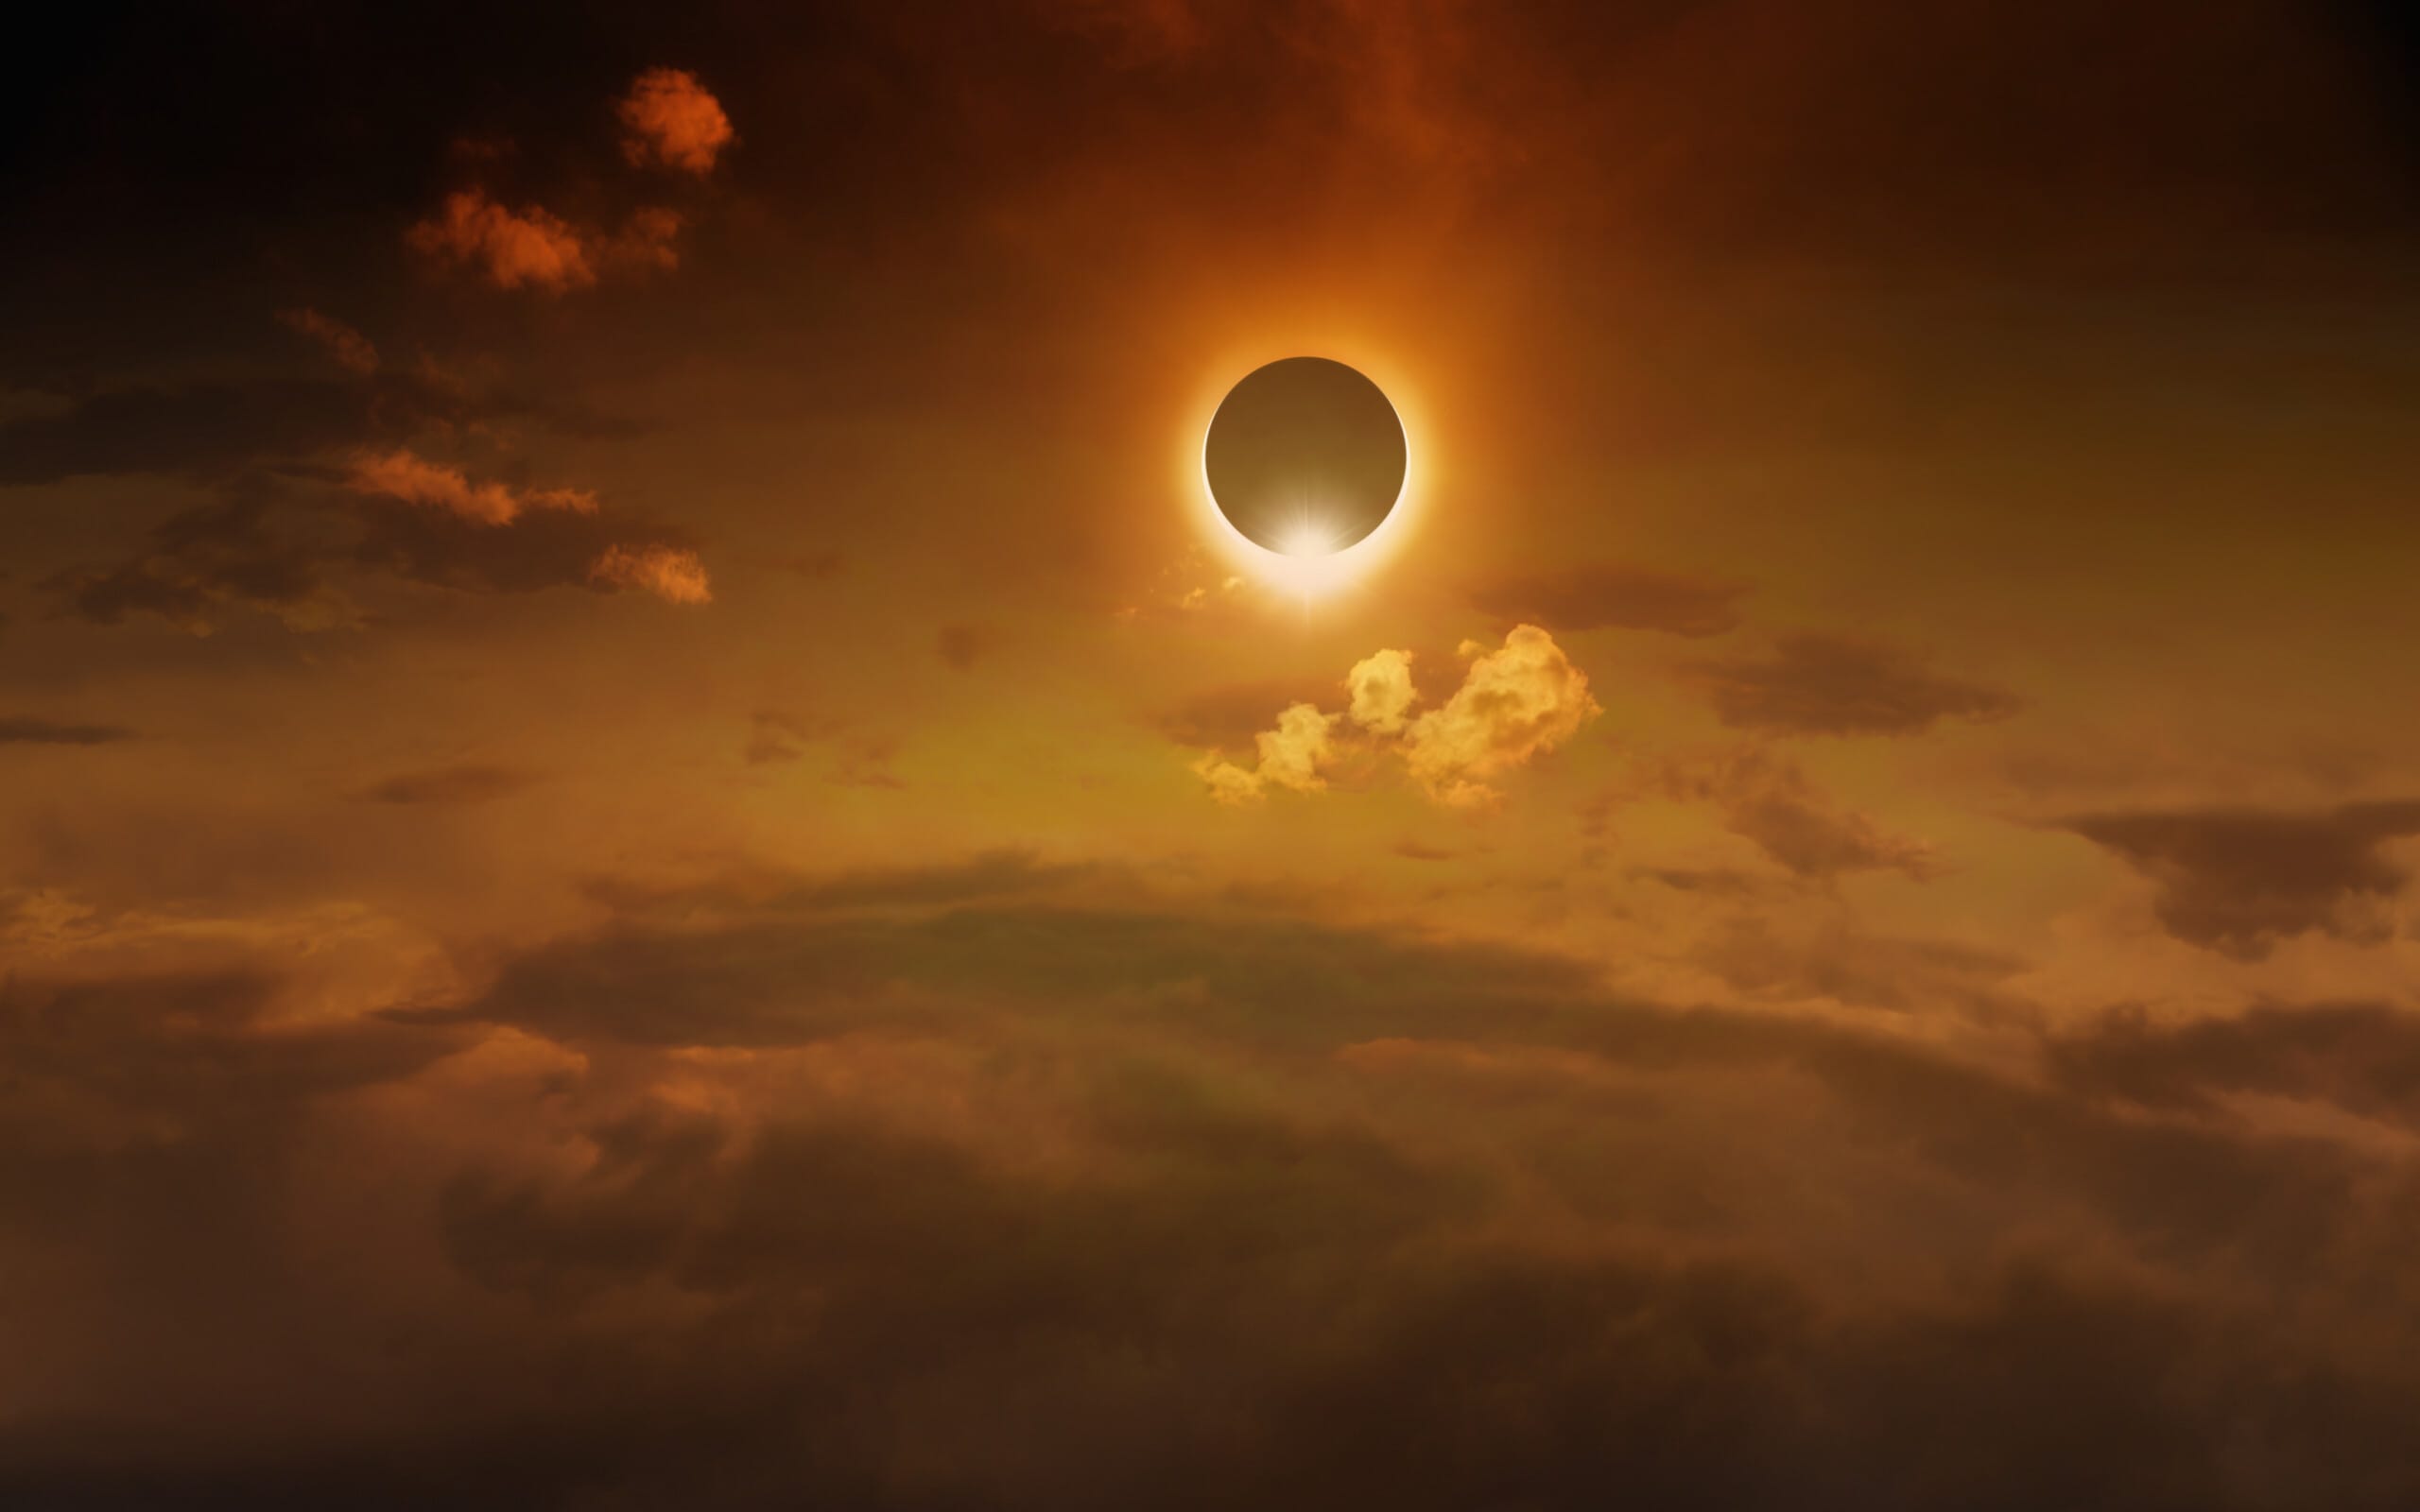 Solar Eclipse in Cuba and Florida Today: What Time?